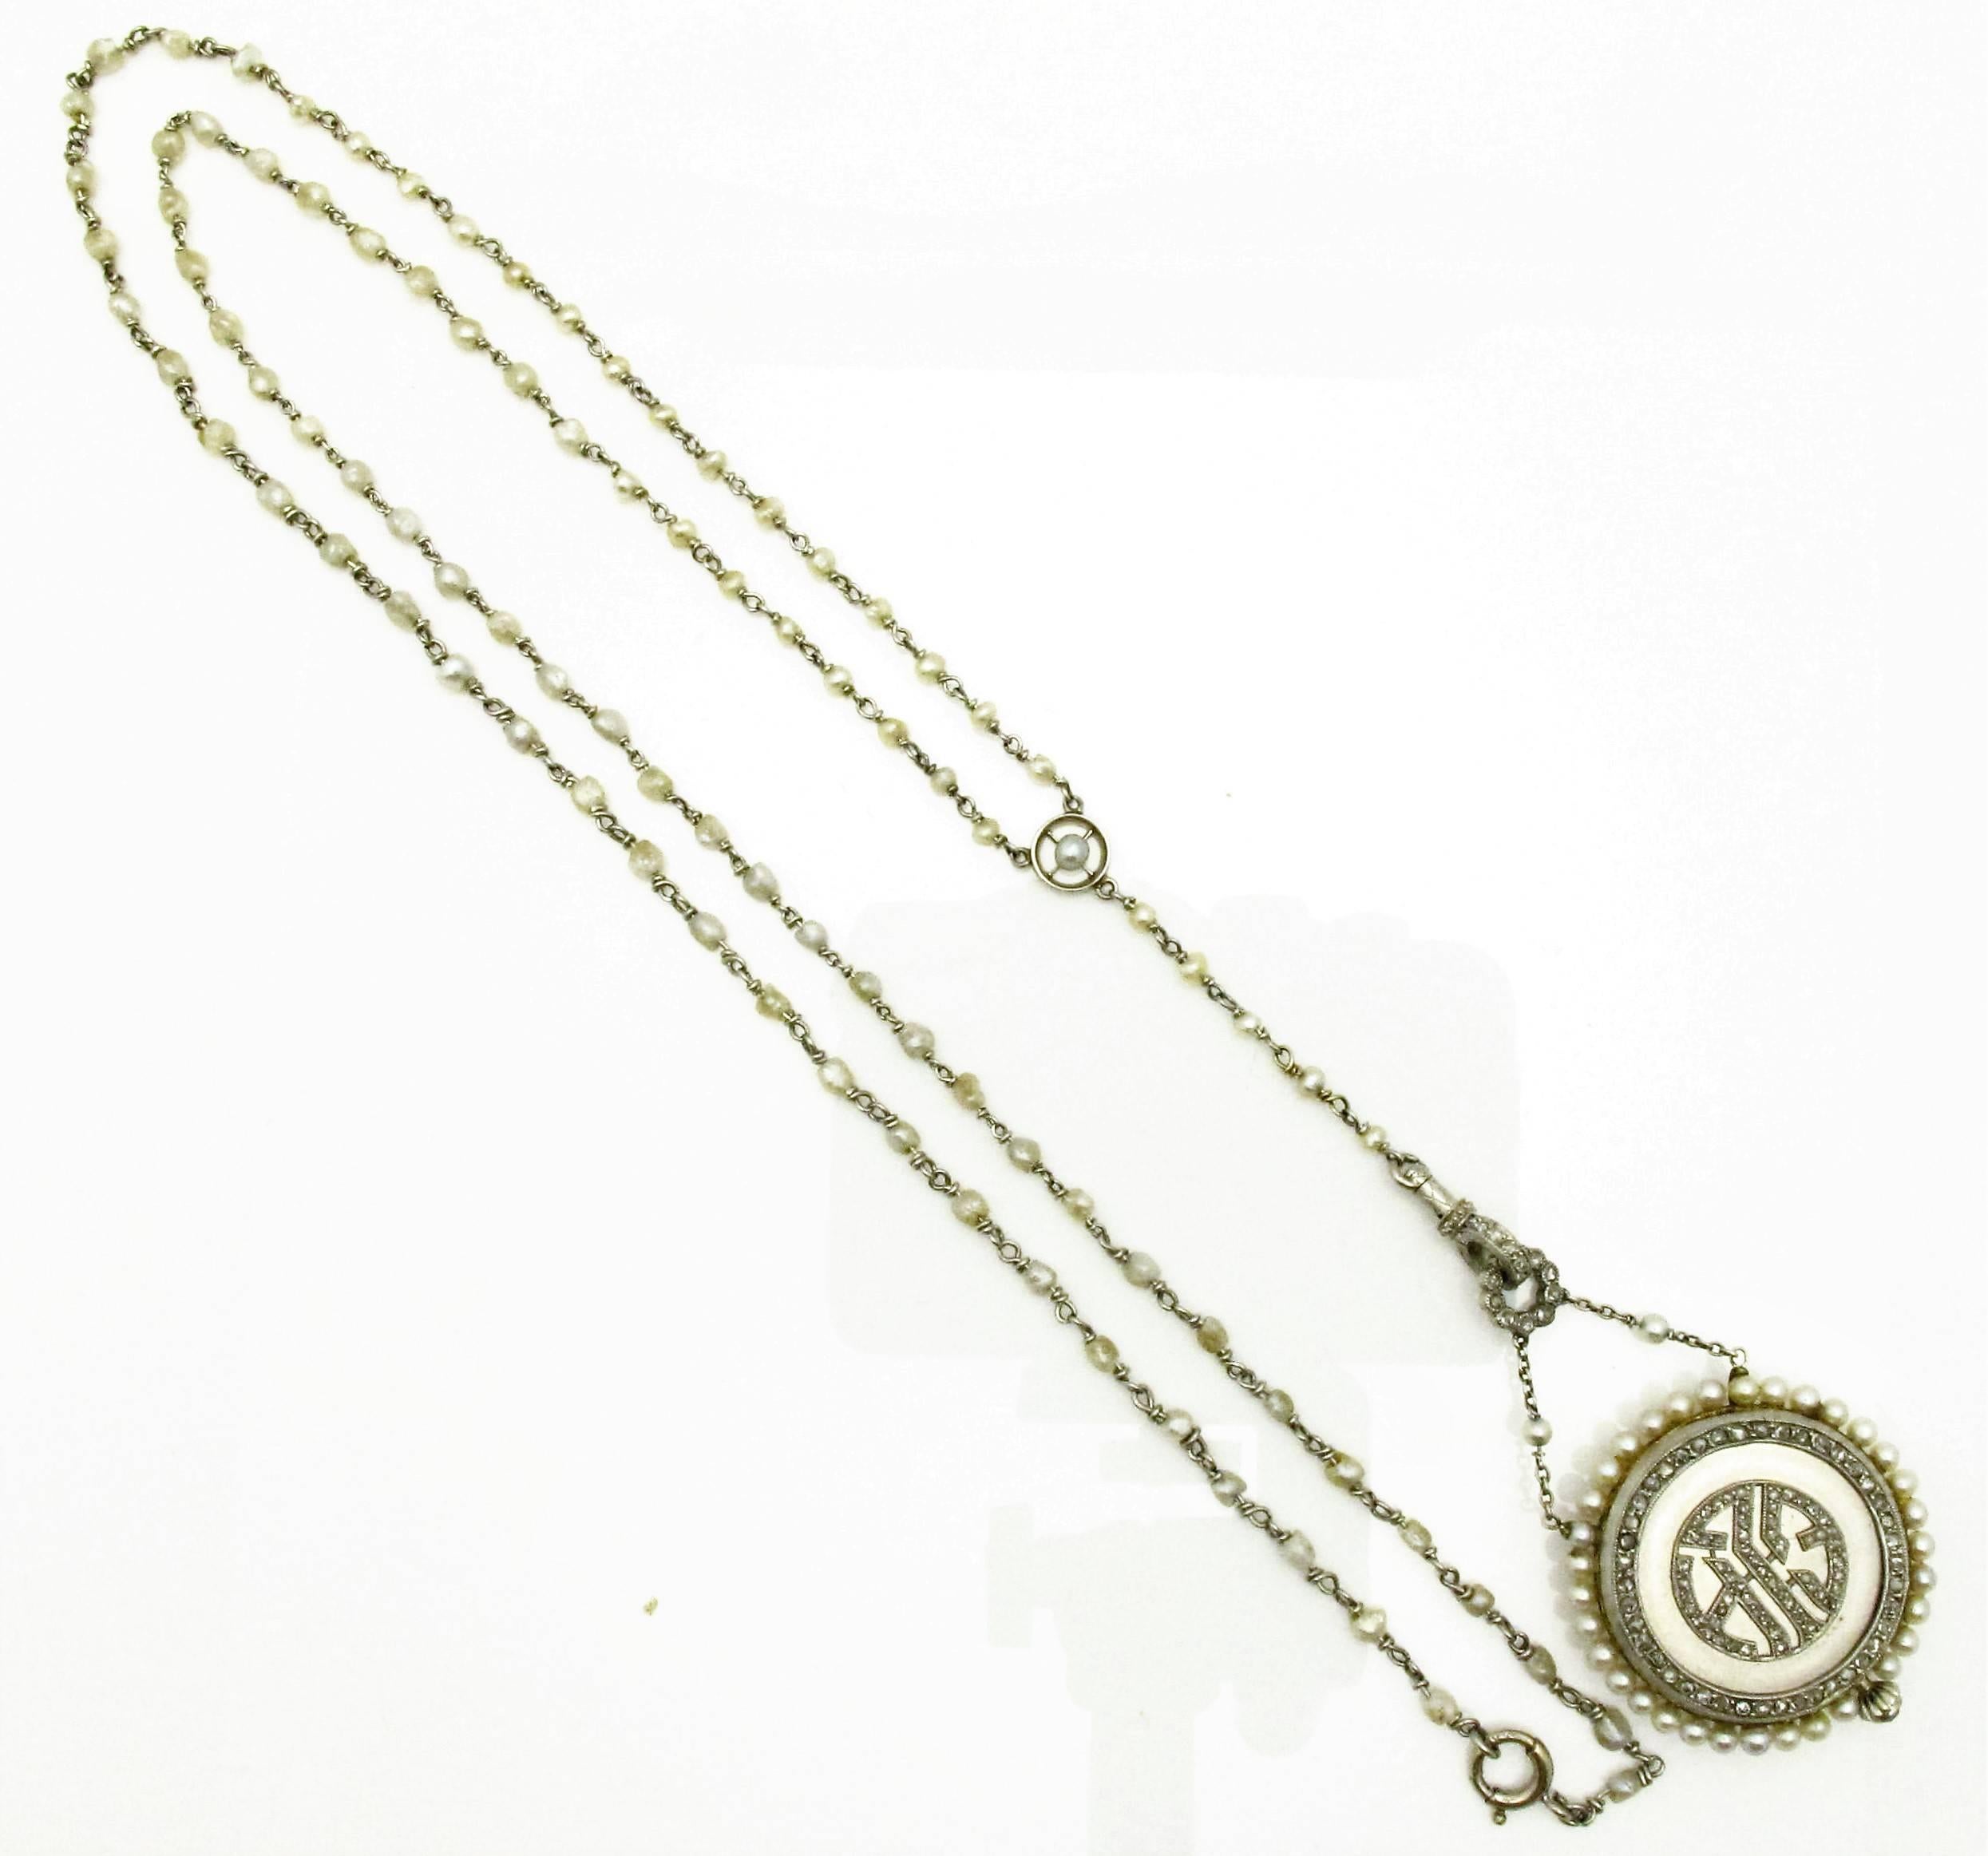 Stunning Edwardian platinum, diamond and seed pearl watch pendant necklace. The platinum link chain set with interspersed seed pearls that terminate to a watch pendant drop. The watch pendant, with working movement, features a diamond set monogram